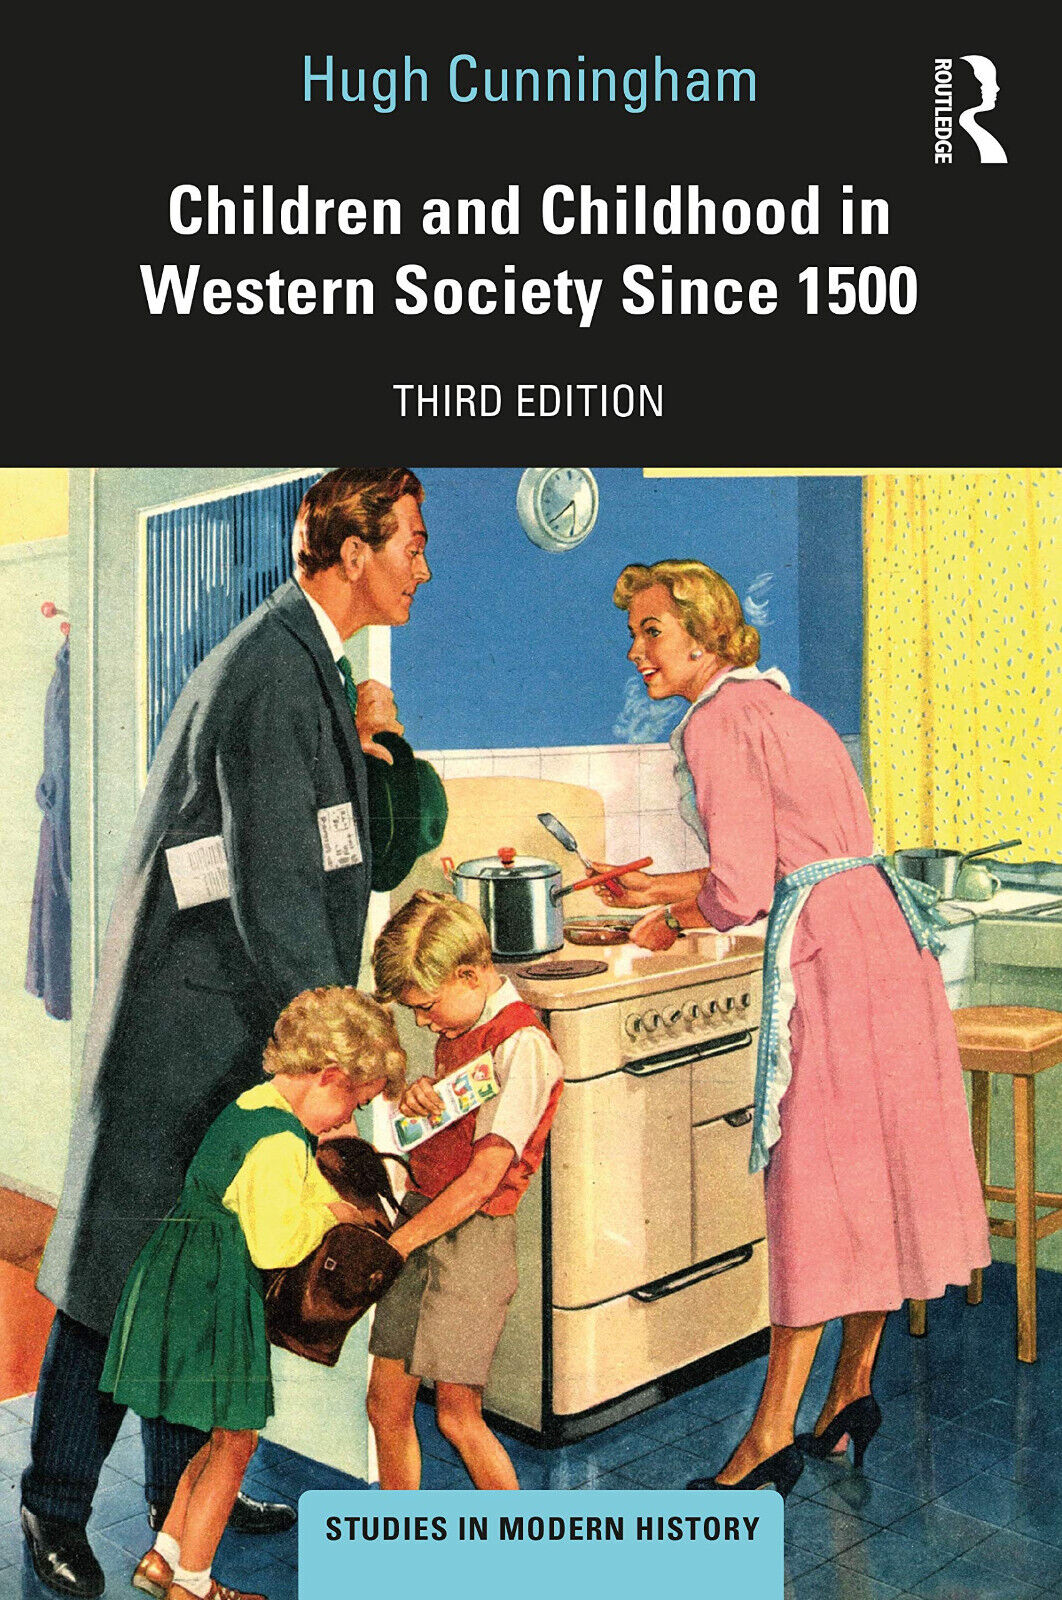 Children And Childhood In Western Society Since 1500 - Hugh Cunningham, 2020